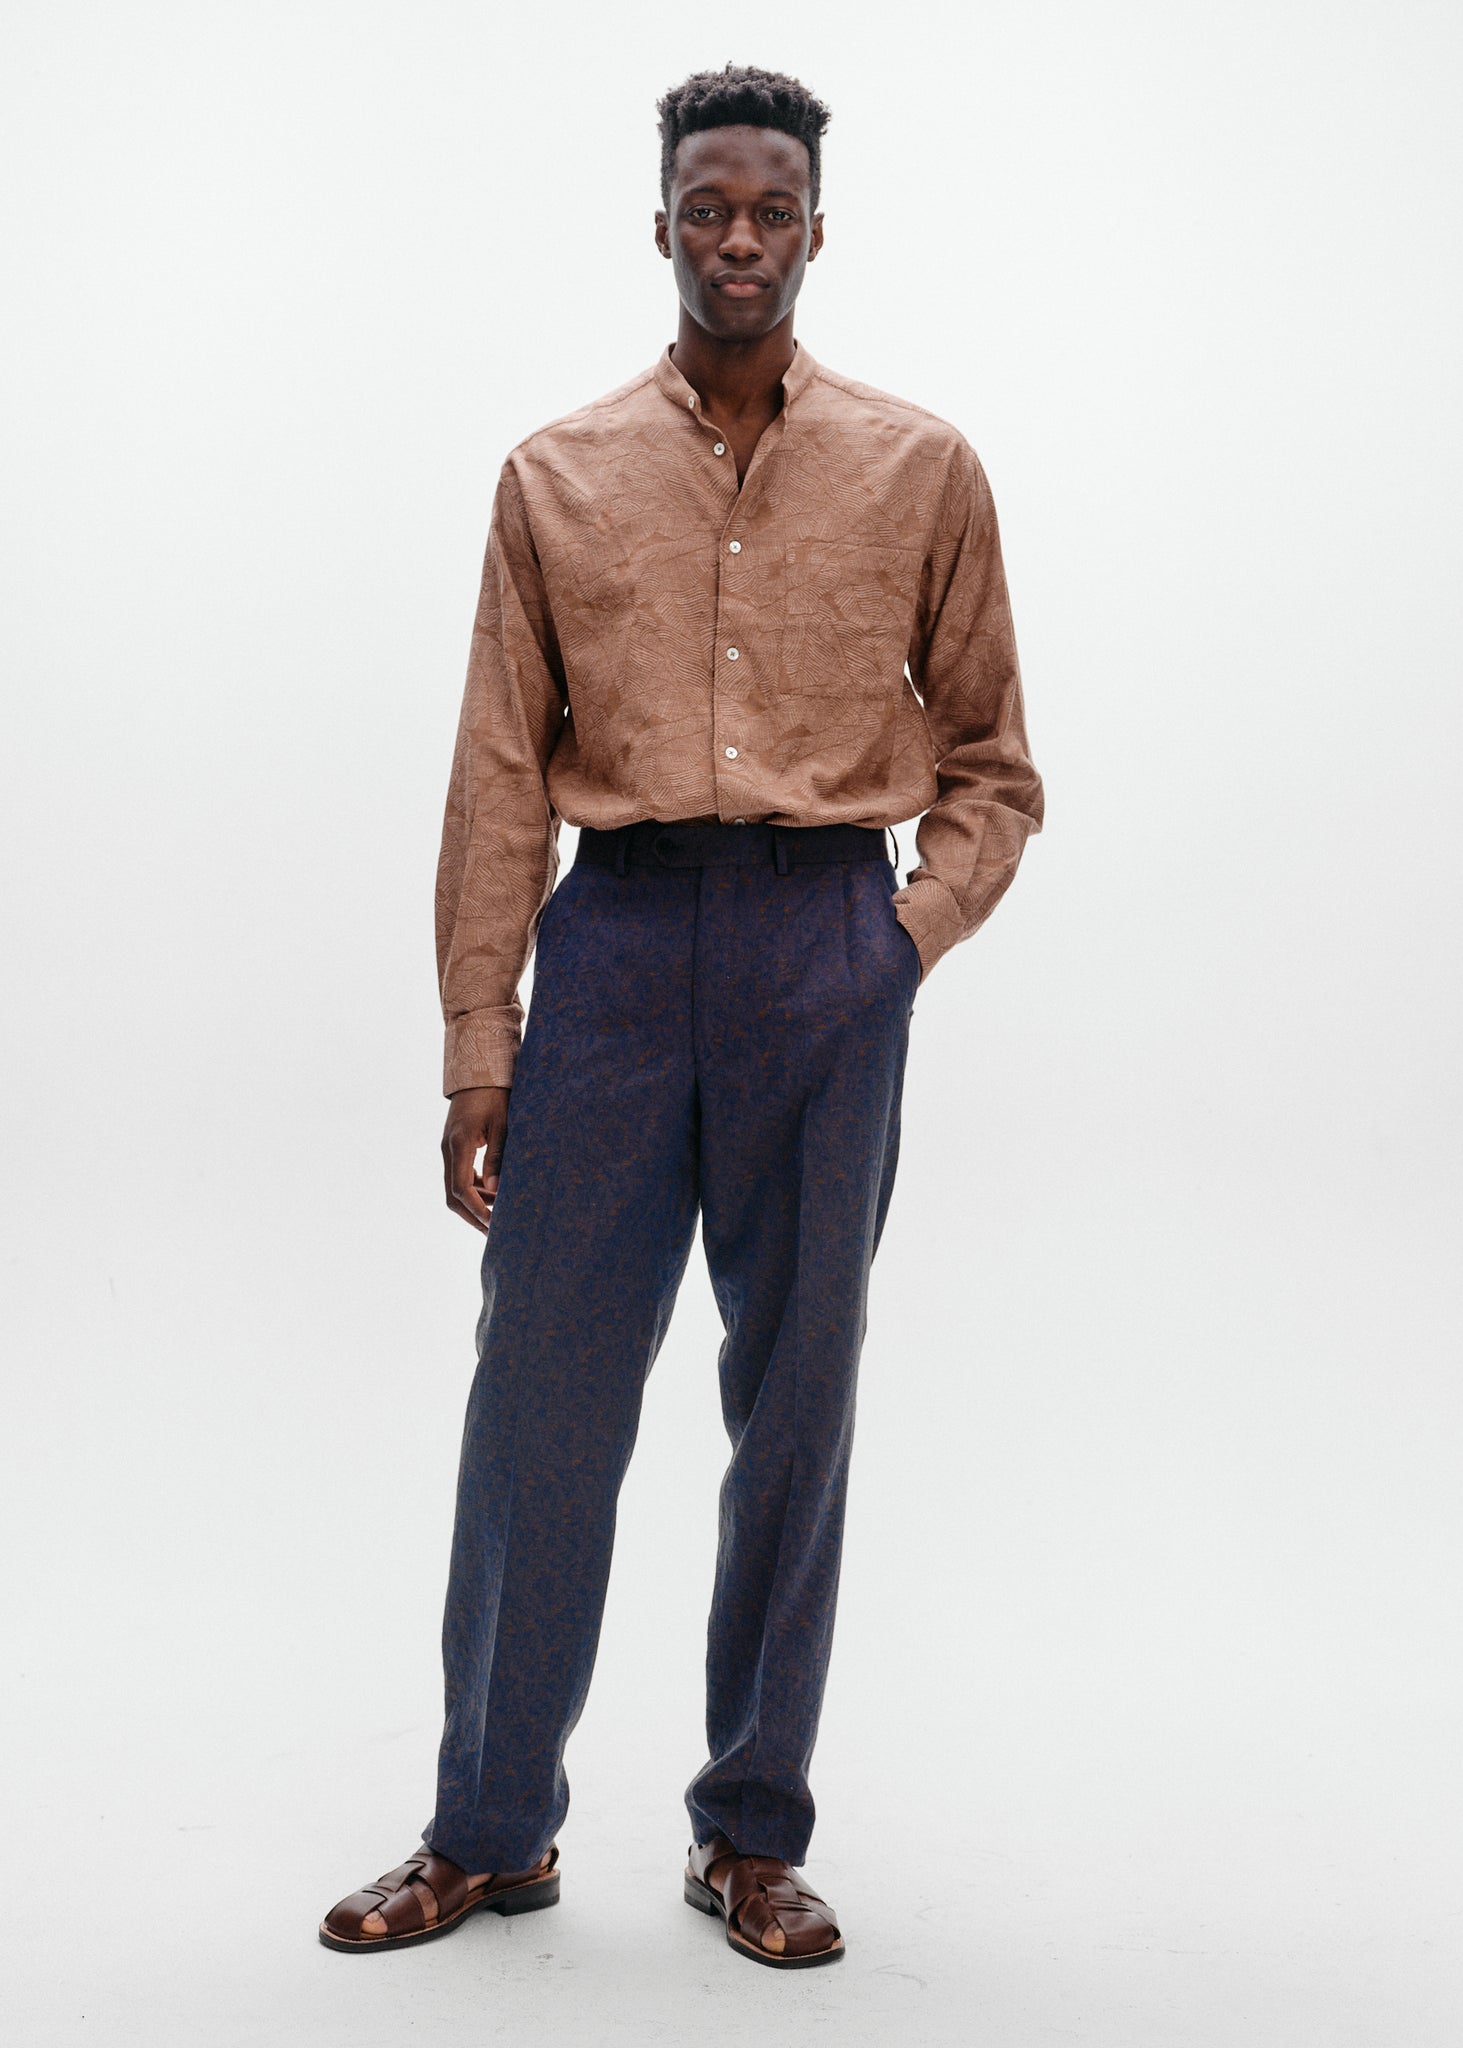 Navy floral iridescent straight trousers